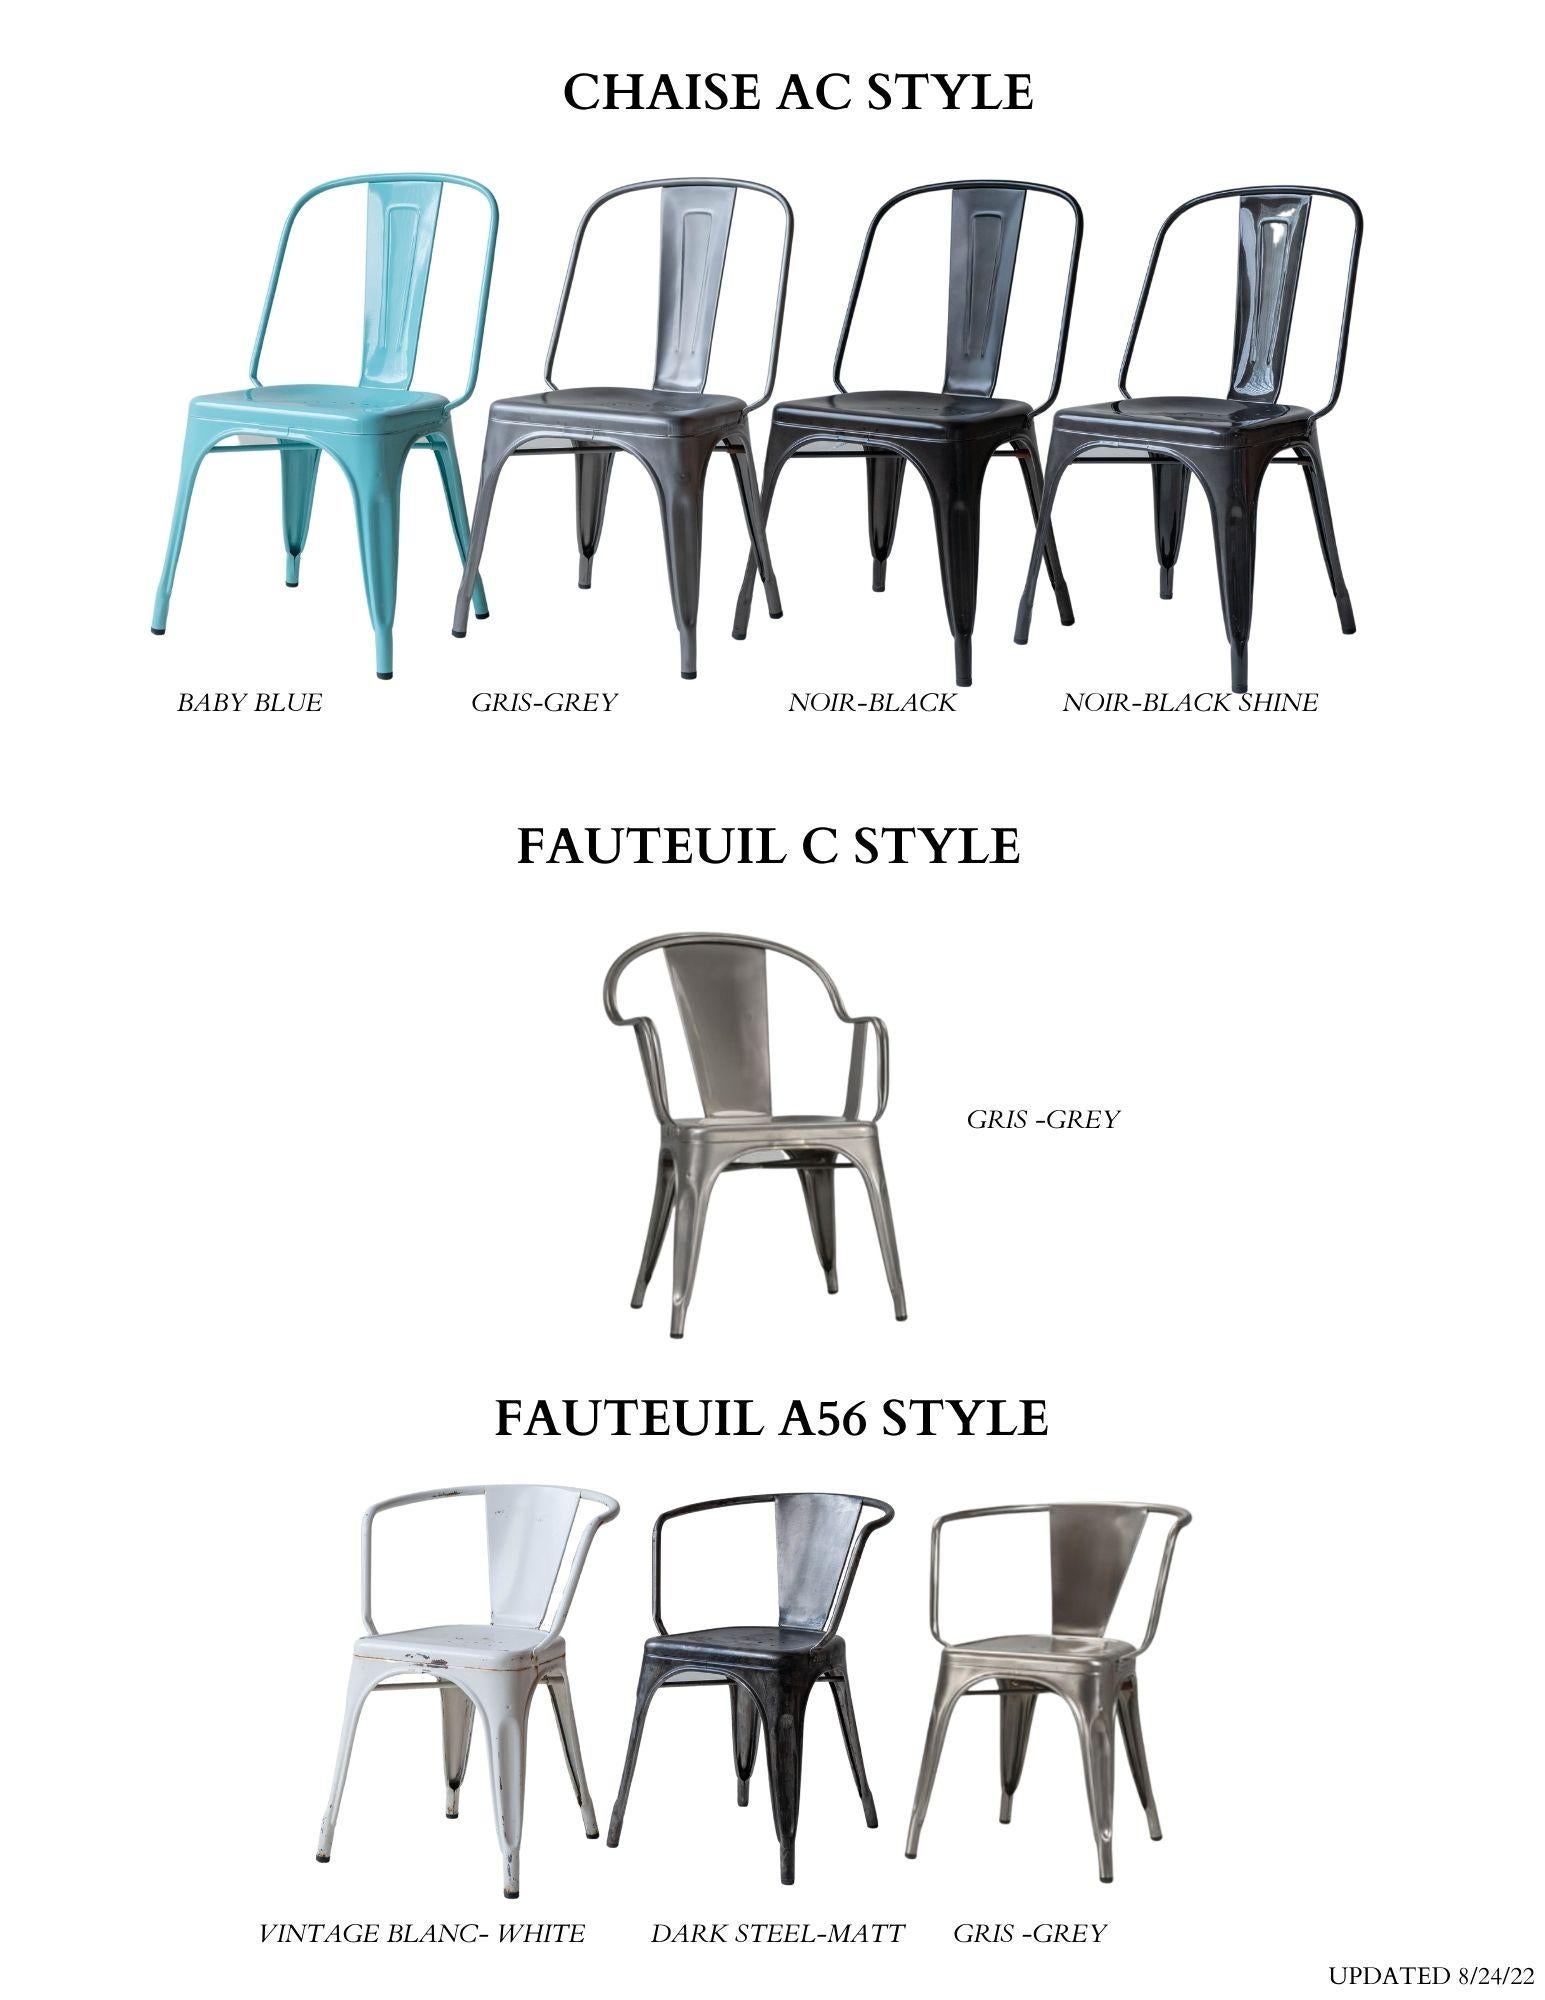 Genuine French Made Tolix Arm Chairs Powder Coated, Showroom Samples Minor Flaws 12